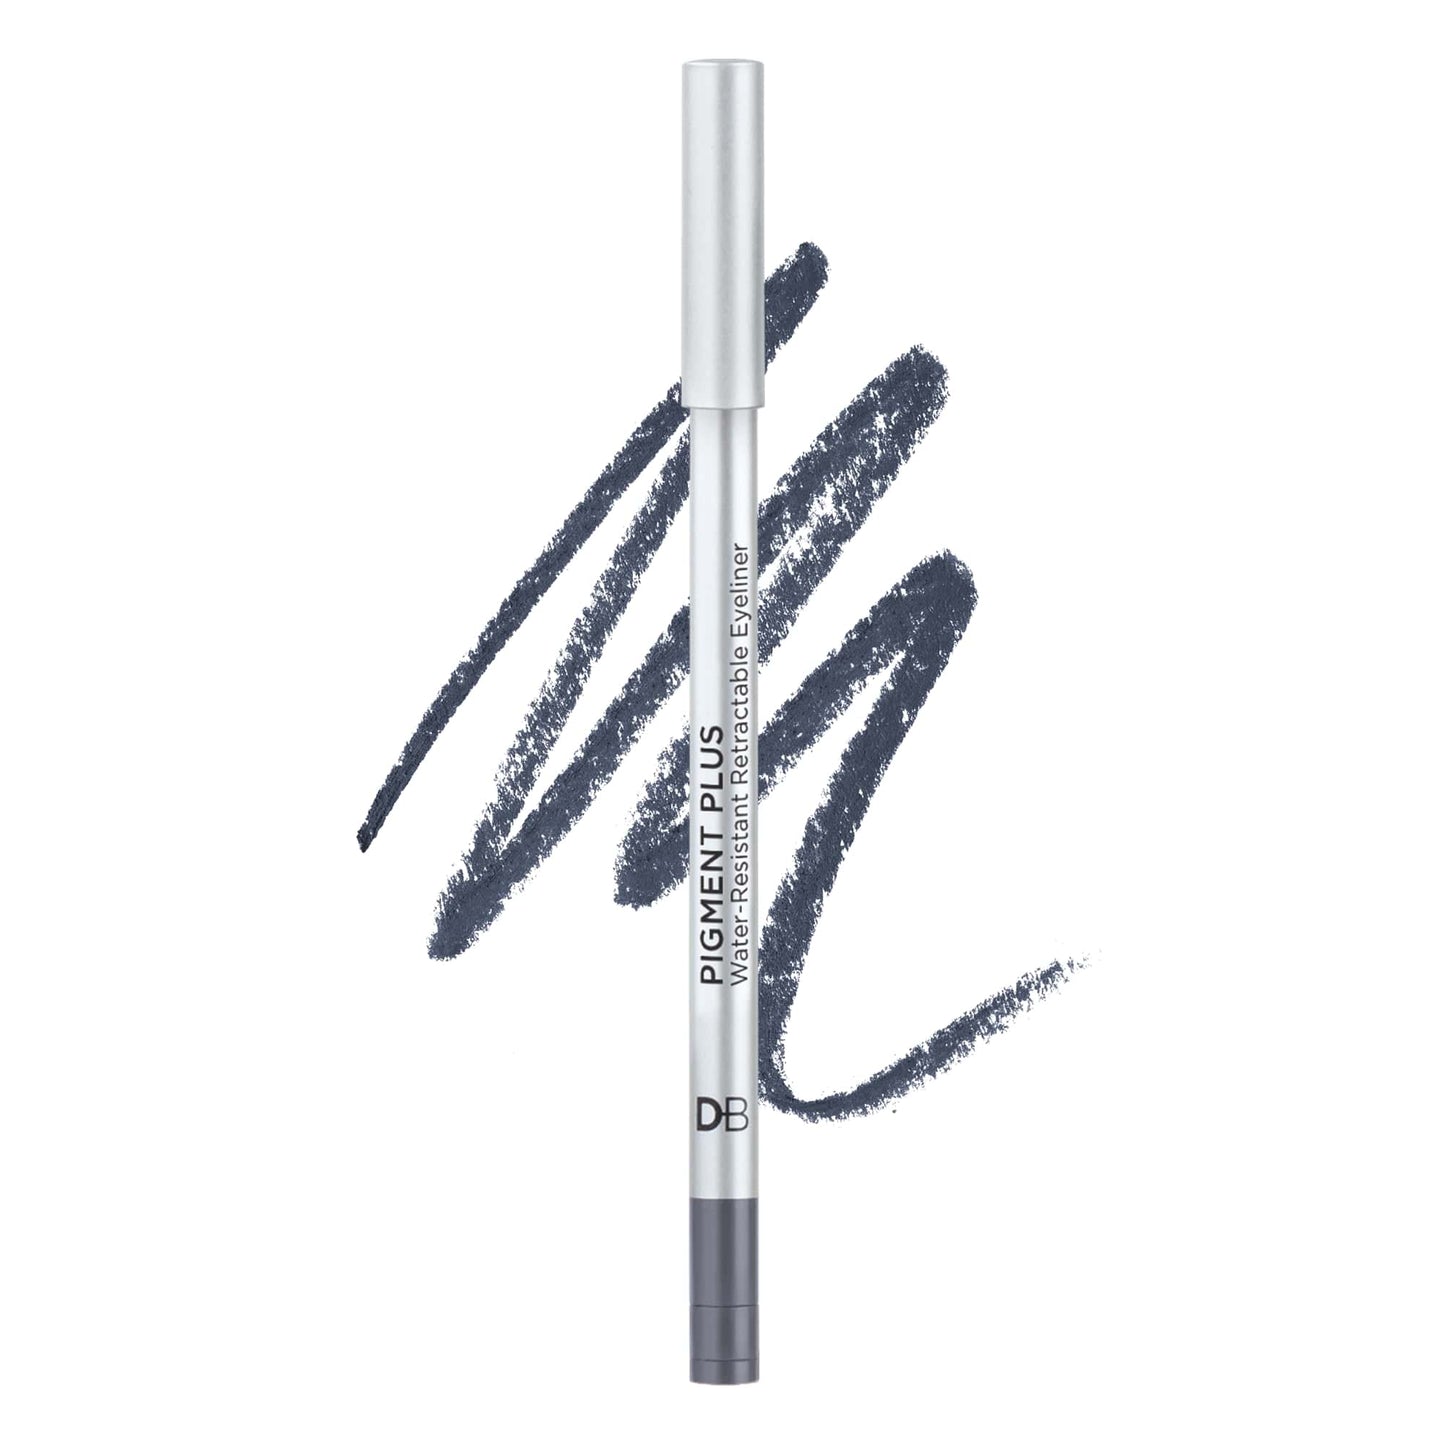 Pigment Plus Water Resistant Eyeliner (Midnight Sky) with swatch | DB Cosmetics